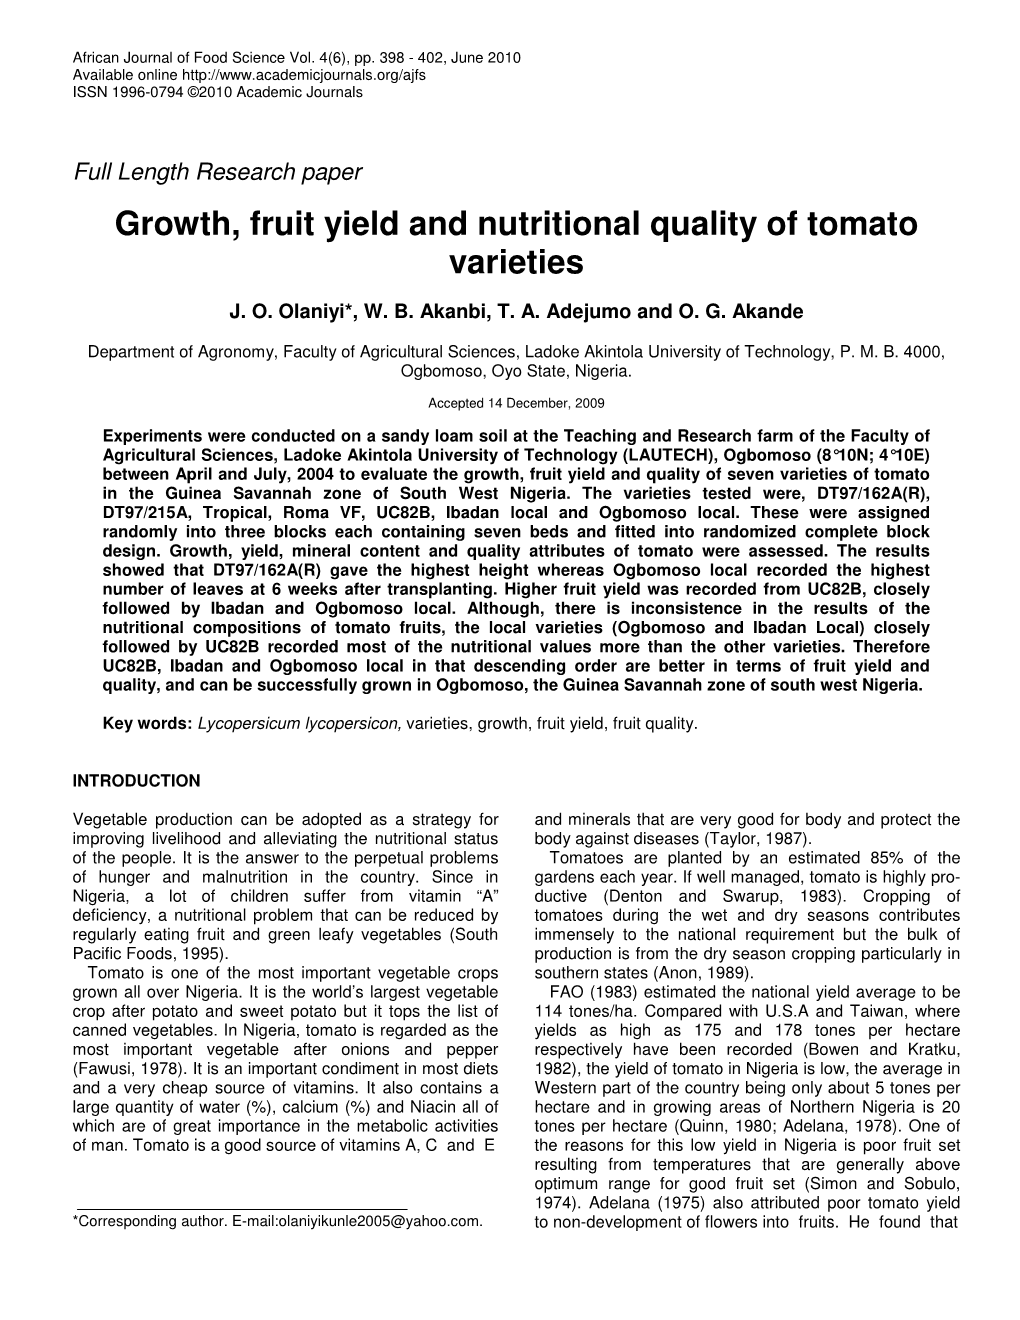 Growth, Fruit Yield and Nutritional Quality of Tomato Varieties